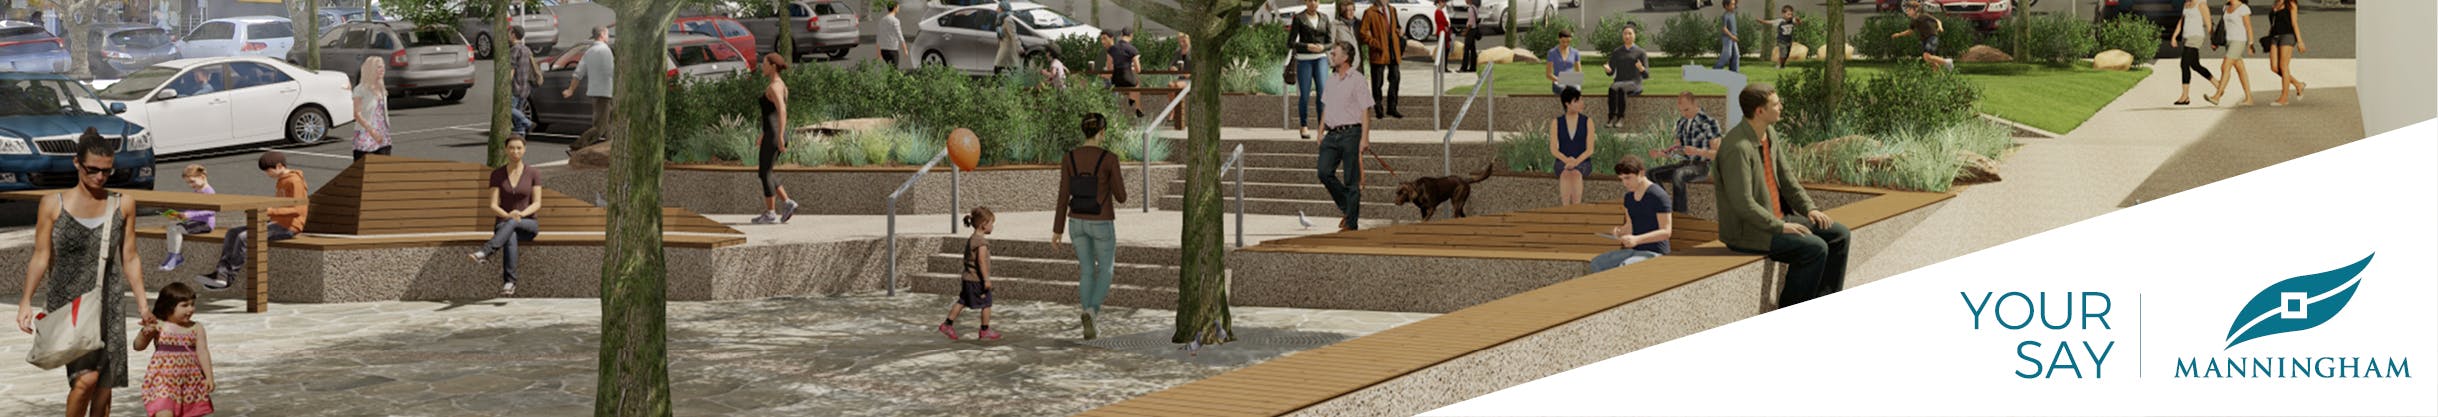 Macedon Square Streetscape Upgrade showing open paved space and people walkiing with shaded area and t=steps down from the car park. 